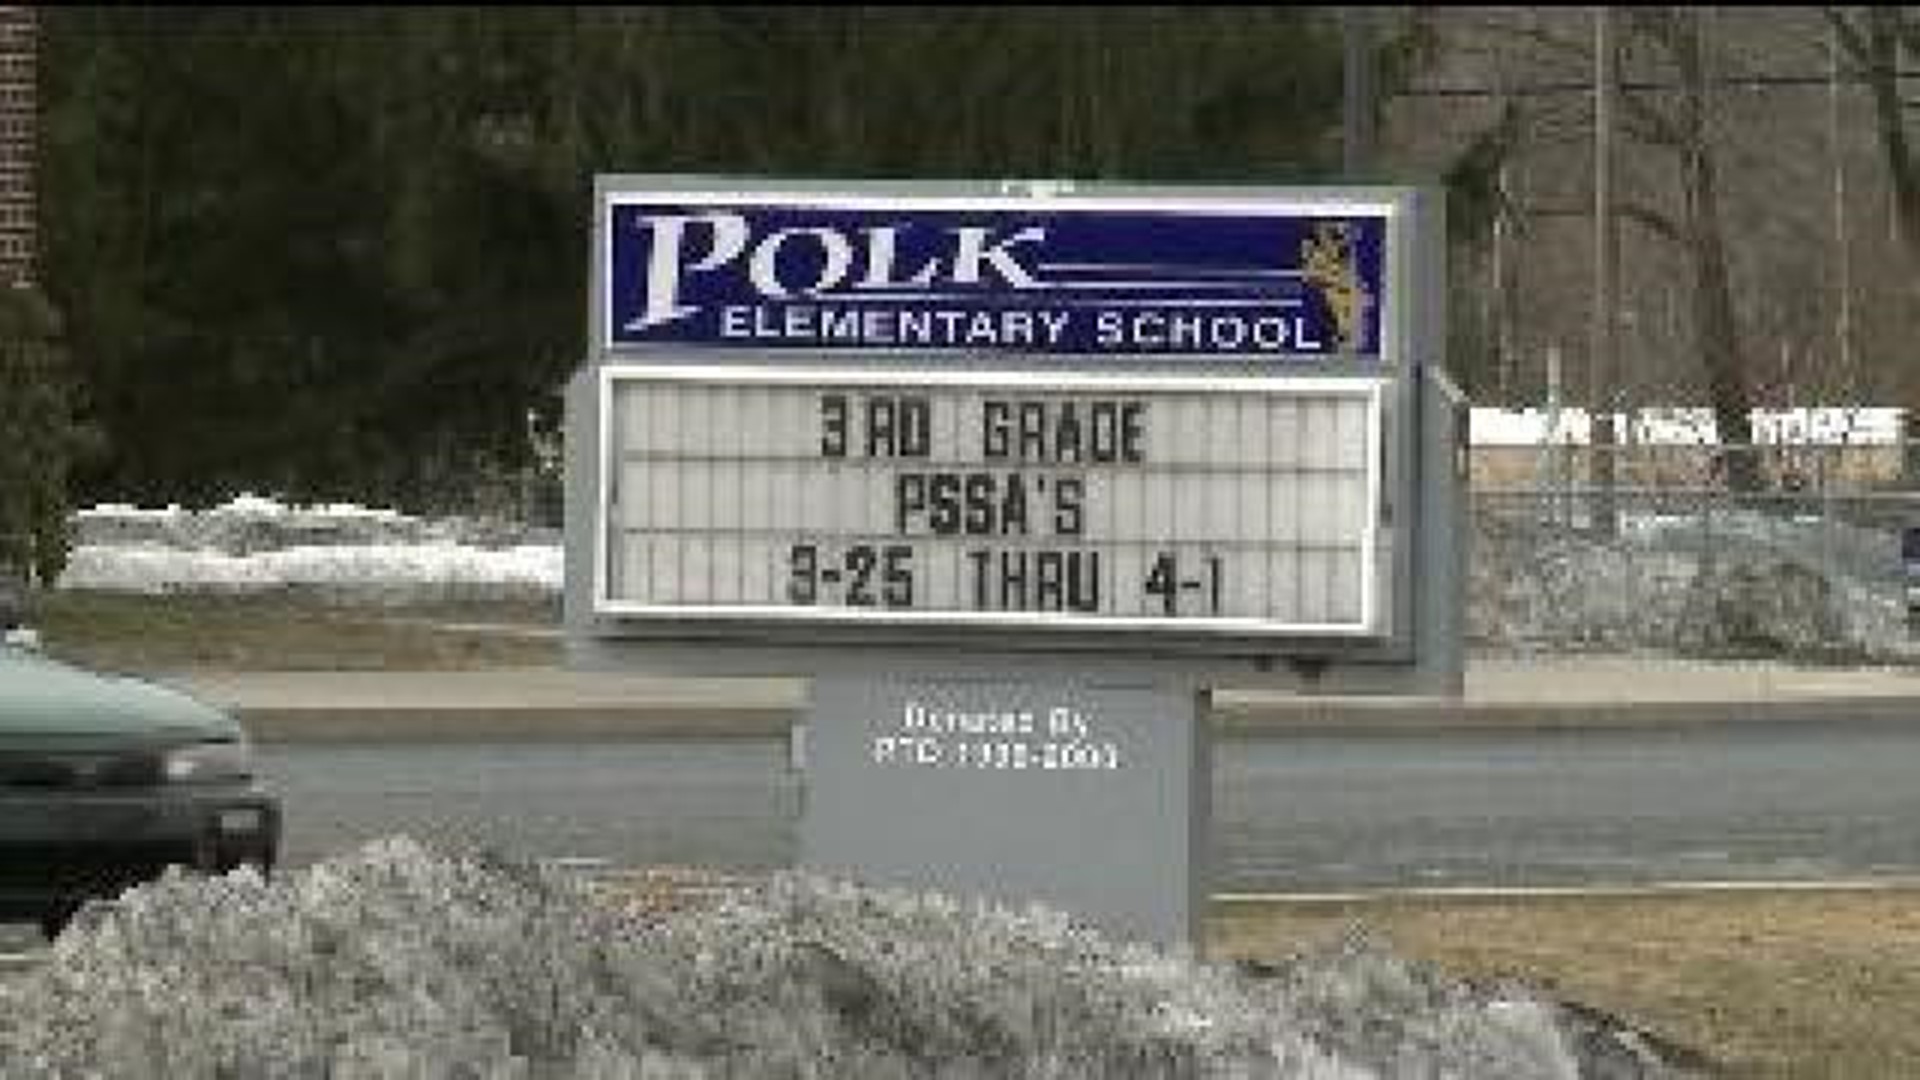 District To Close Elementary School